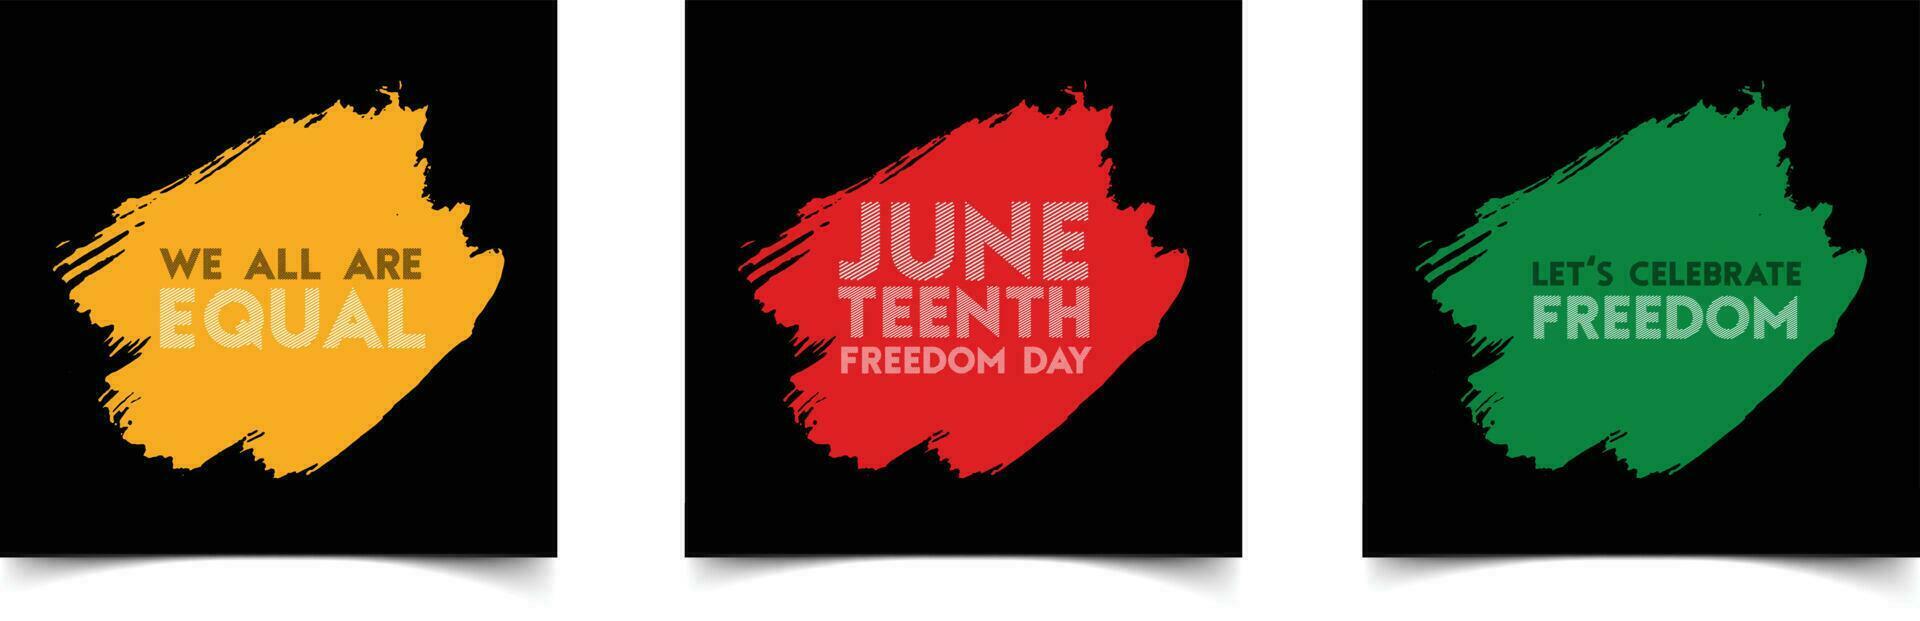 Social media post template for Juneteenth day, Celebration freedom, emancipation day in 19 june, African-American history and heritage. vector